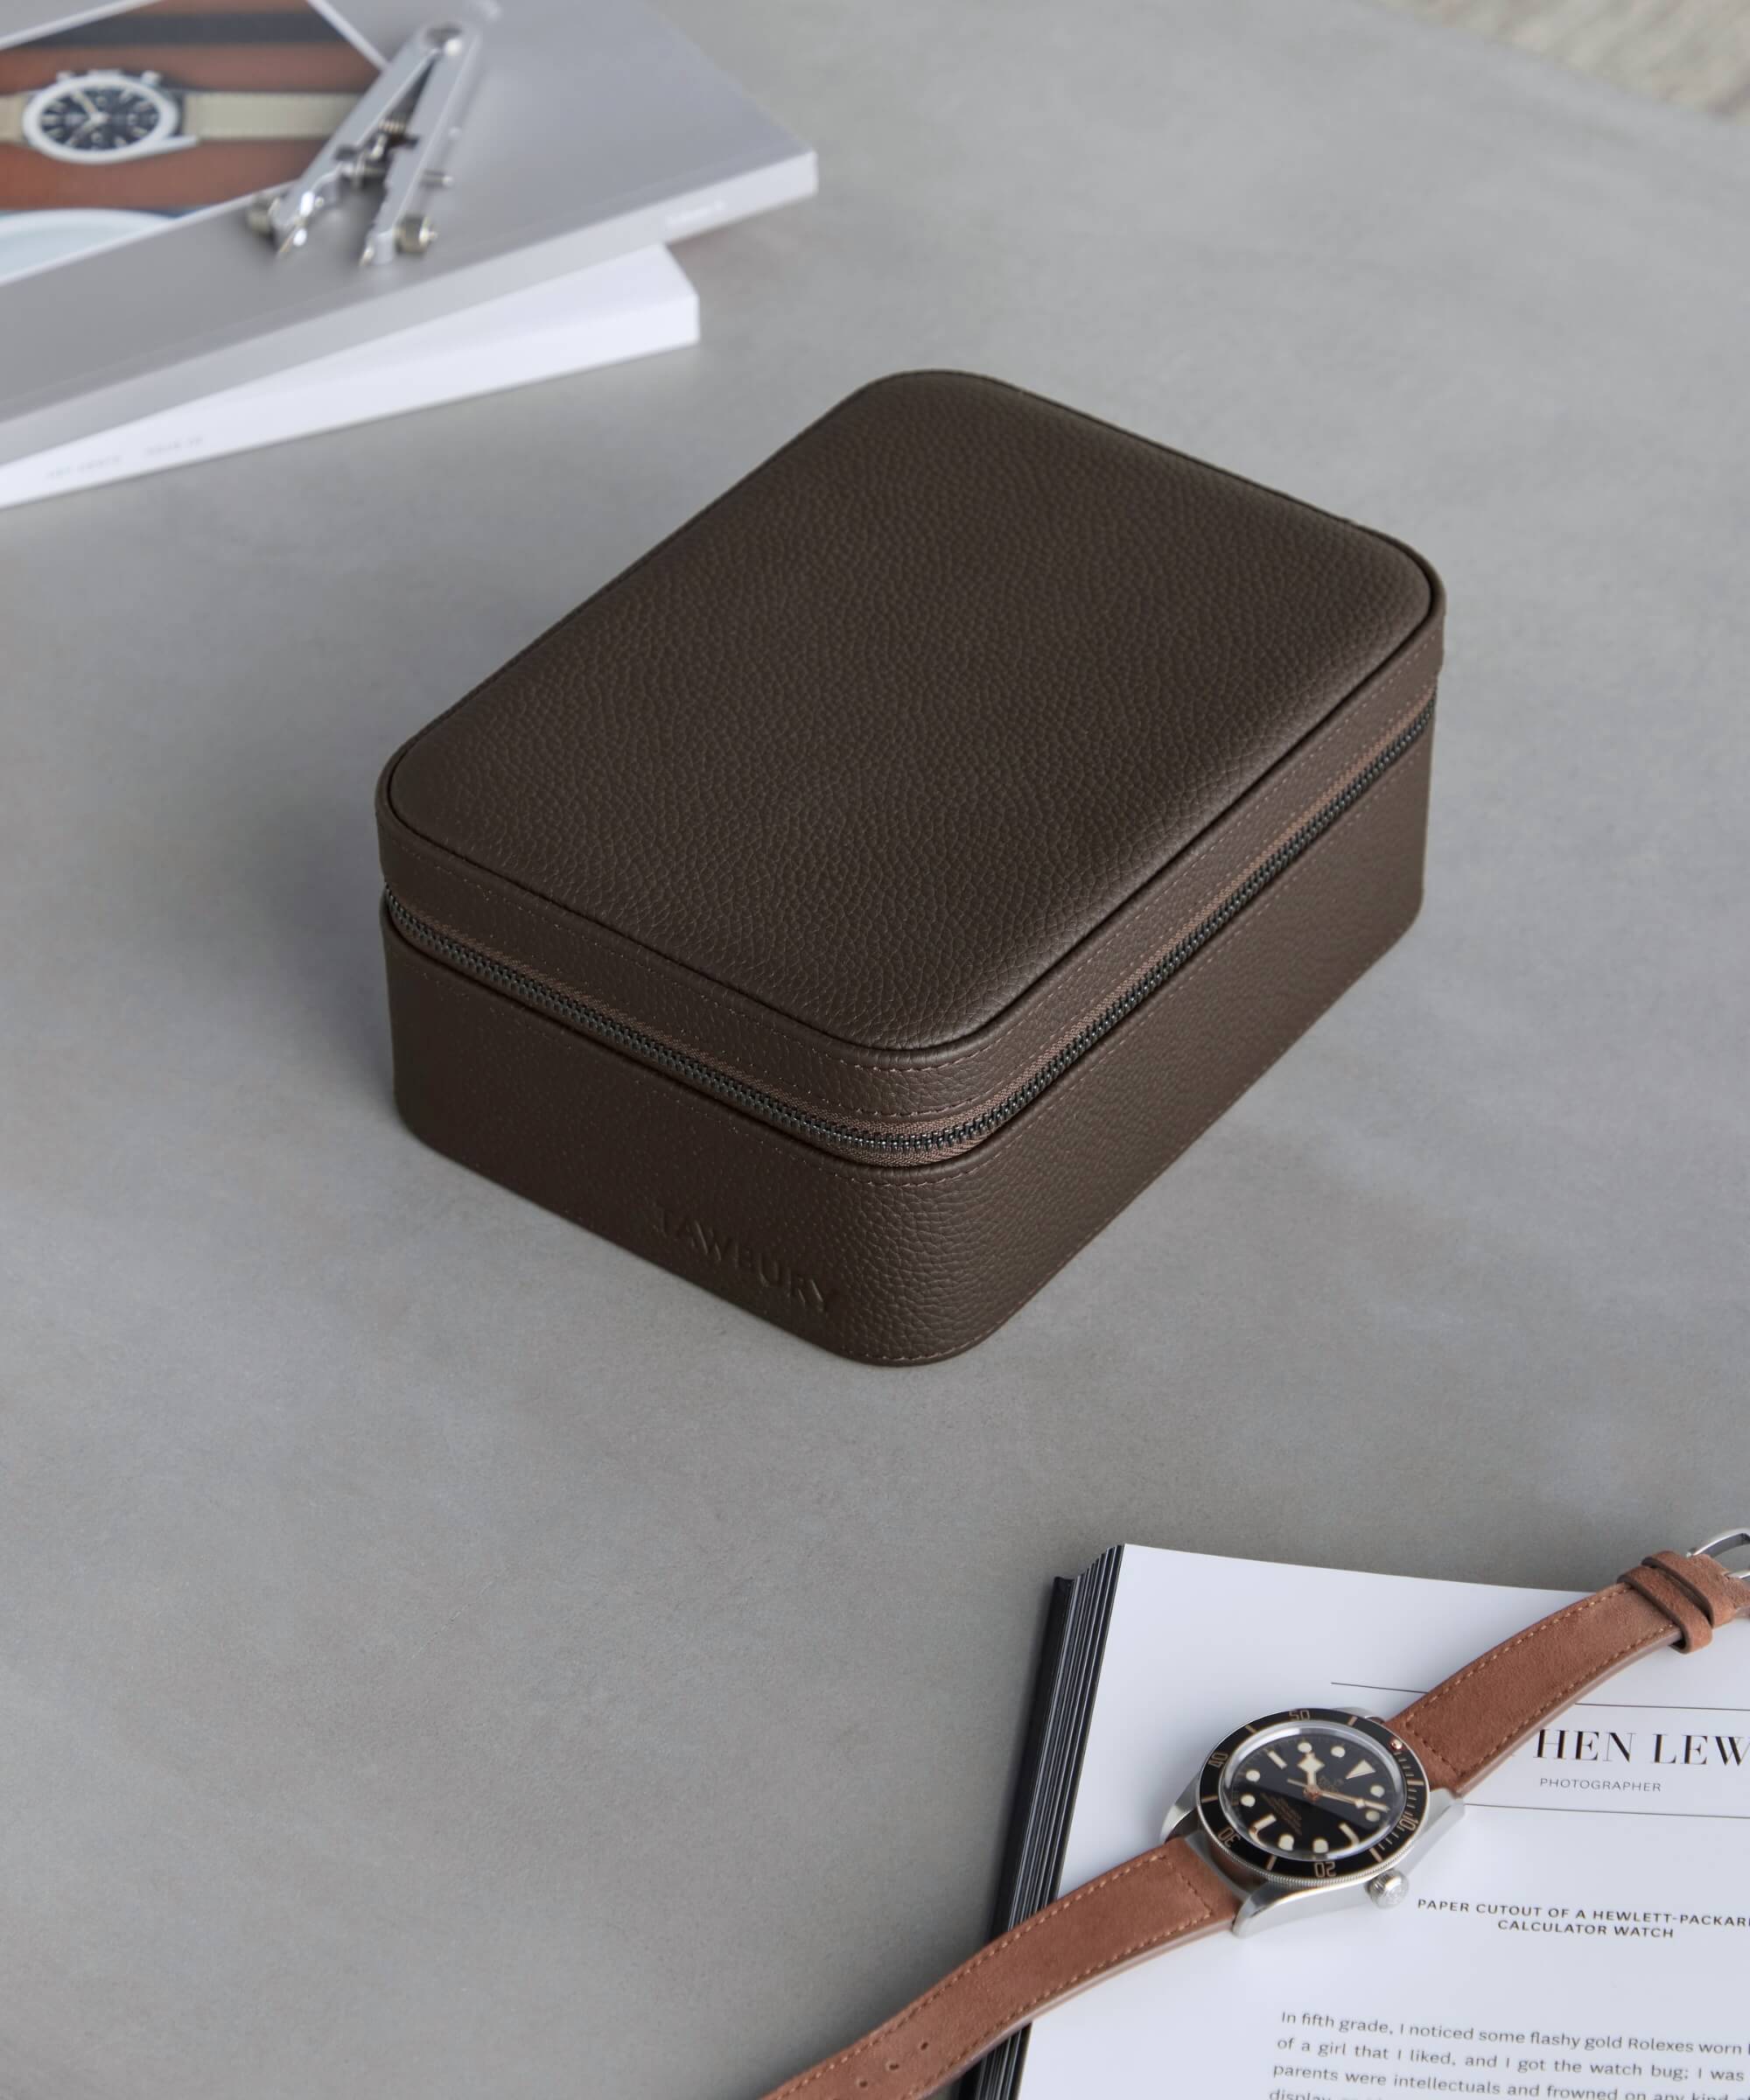 A brown Fraser 4 Watch Travel Case - Brown (Coming Soon) rests on a light gray surface with an open book nearby. A wristwatch and a pair of eyeglasses lie in the background, showcasing the elegance of the TAWBURY range.